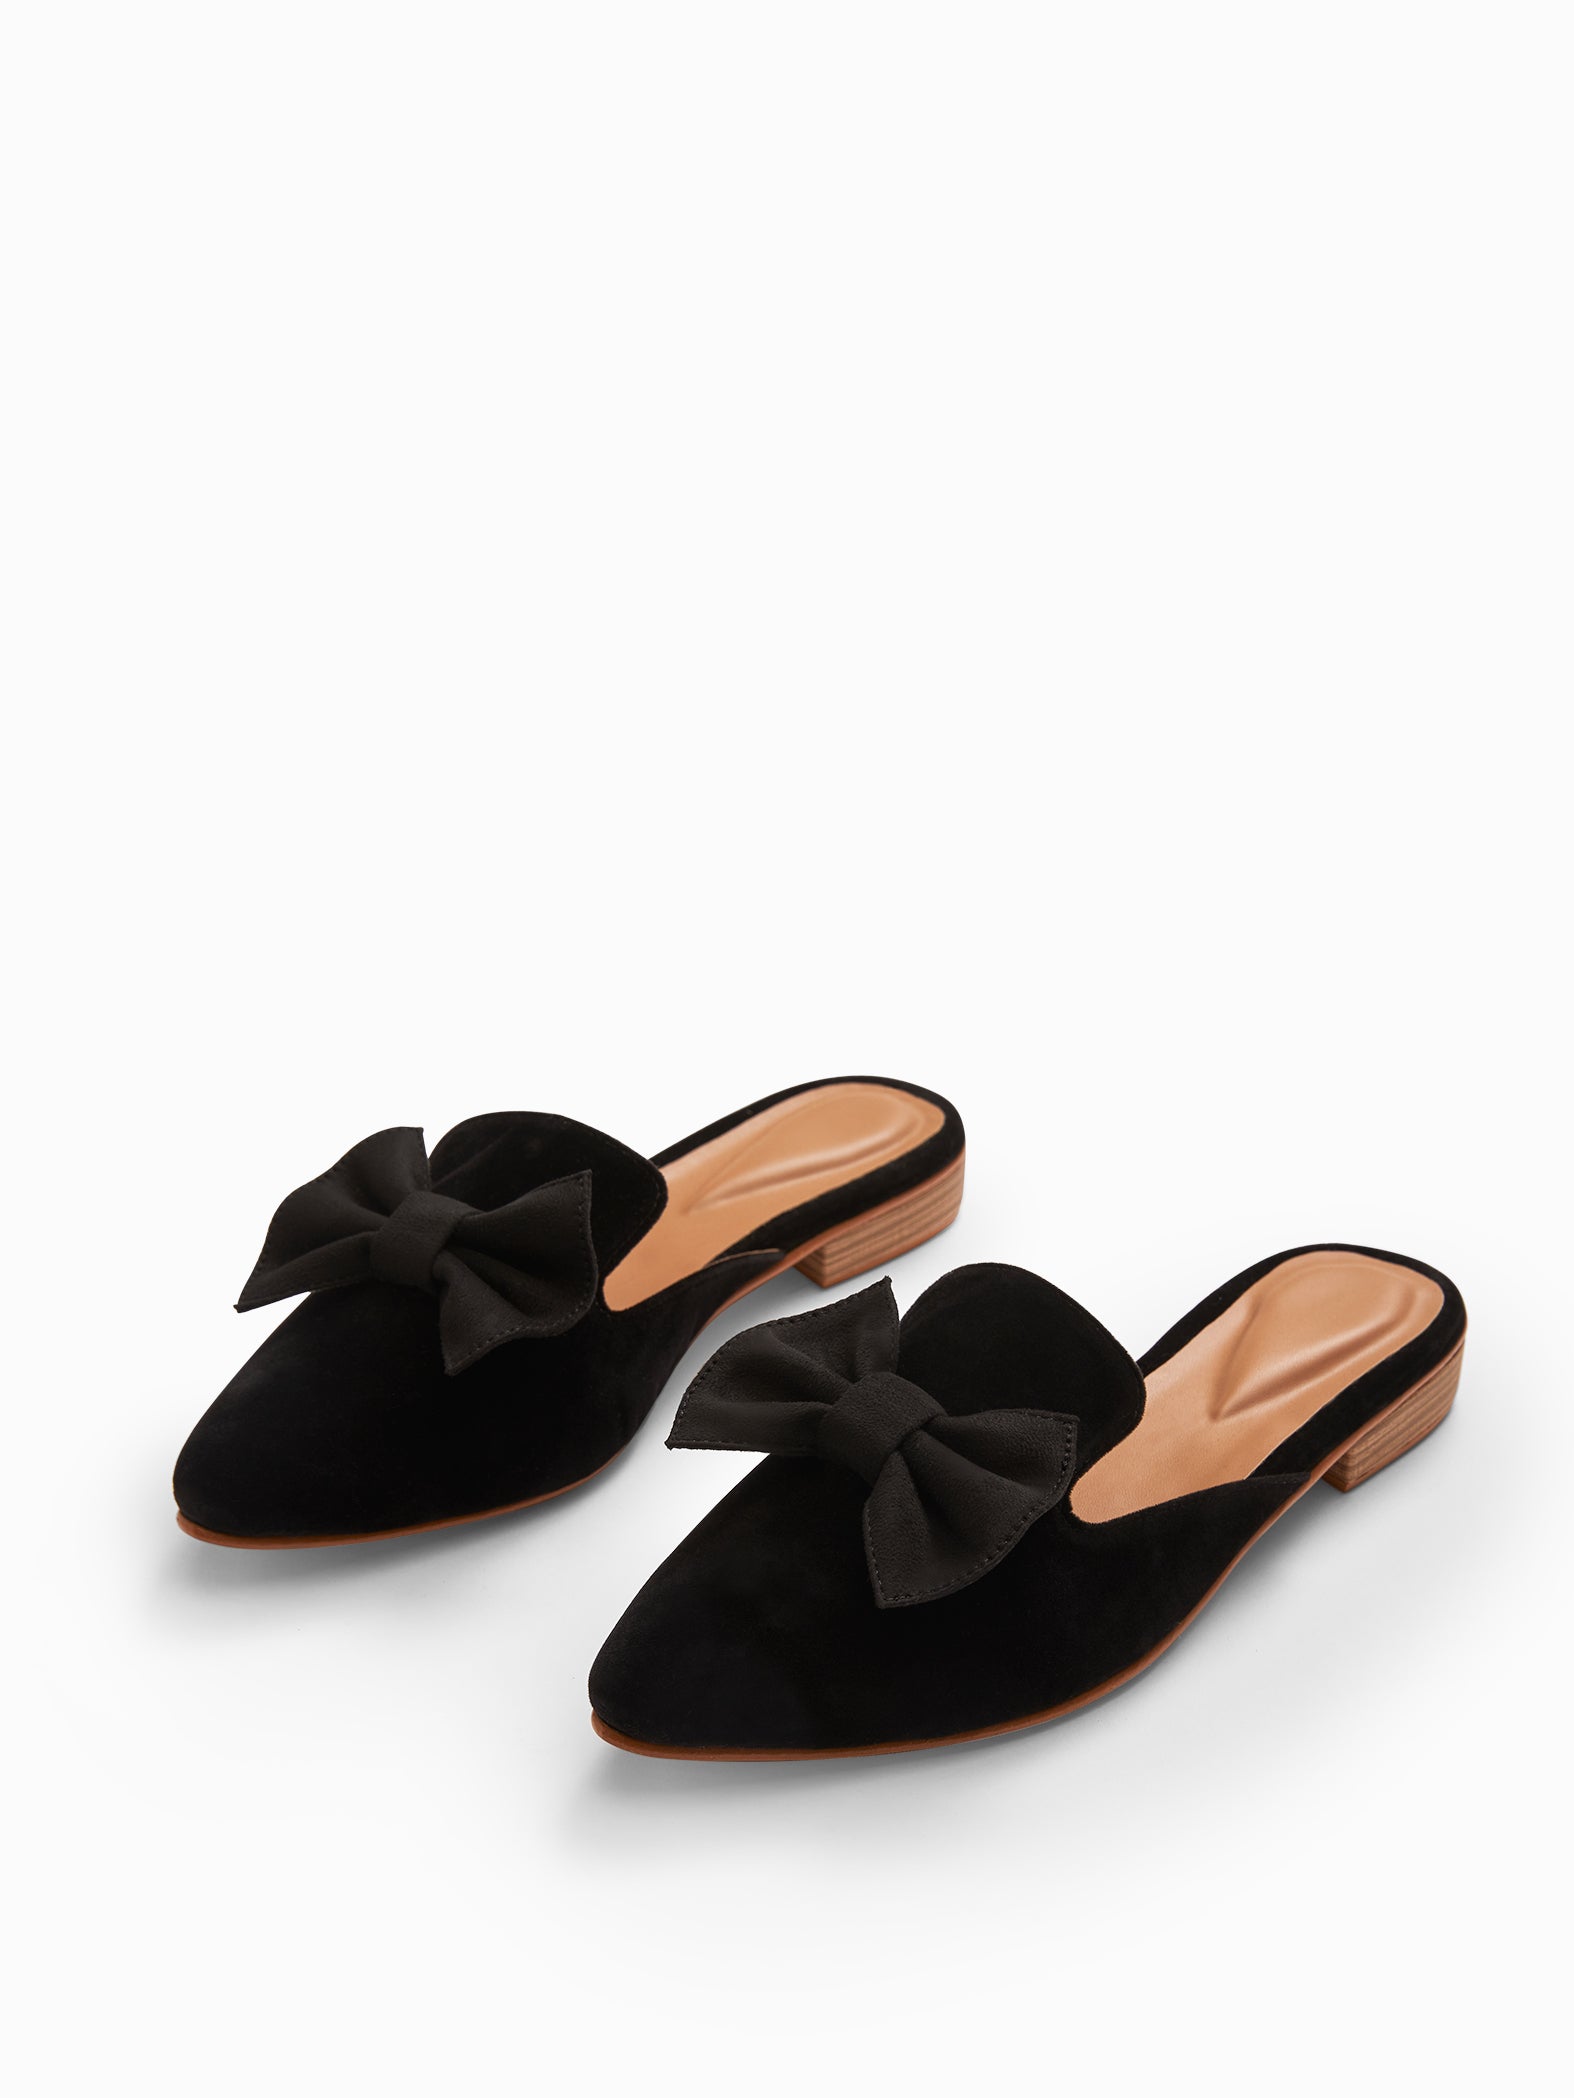 Black Suede Bow Mules